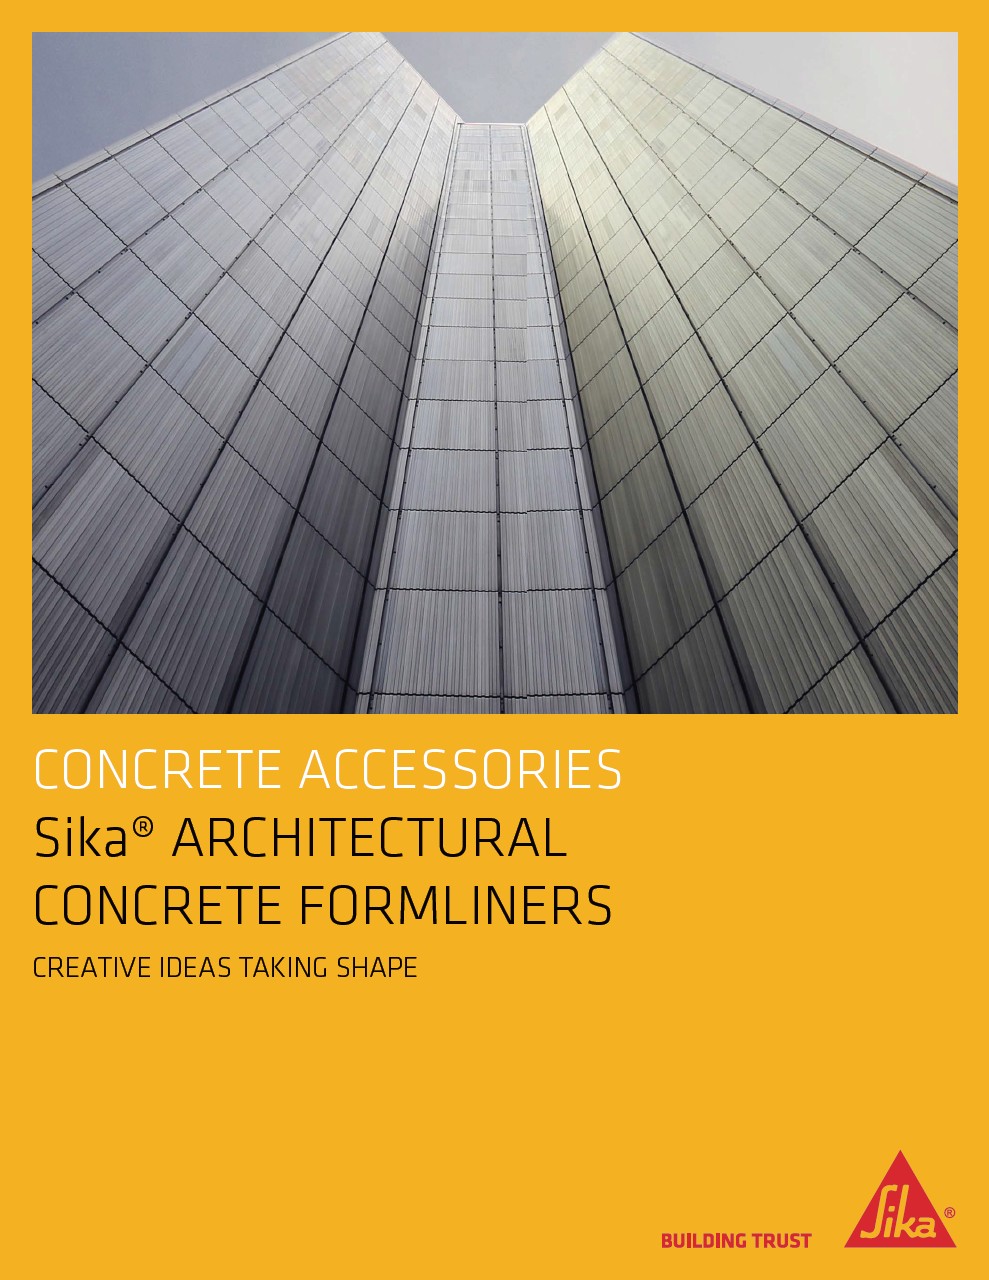 Sika Architectural Concrete Formliners